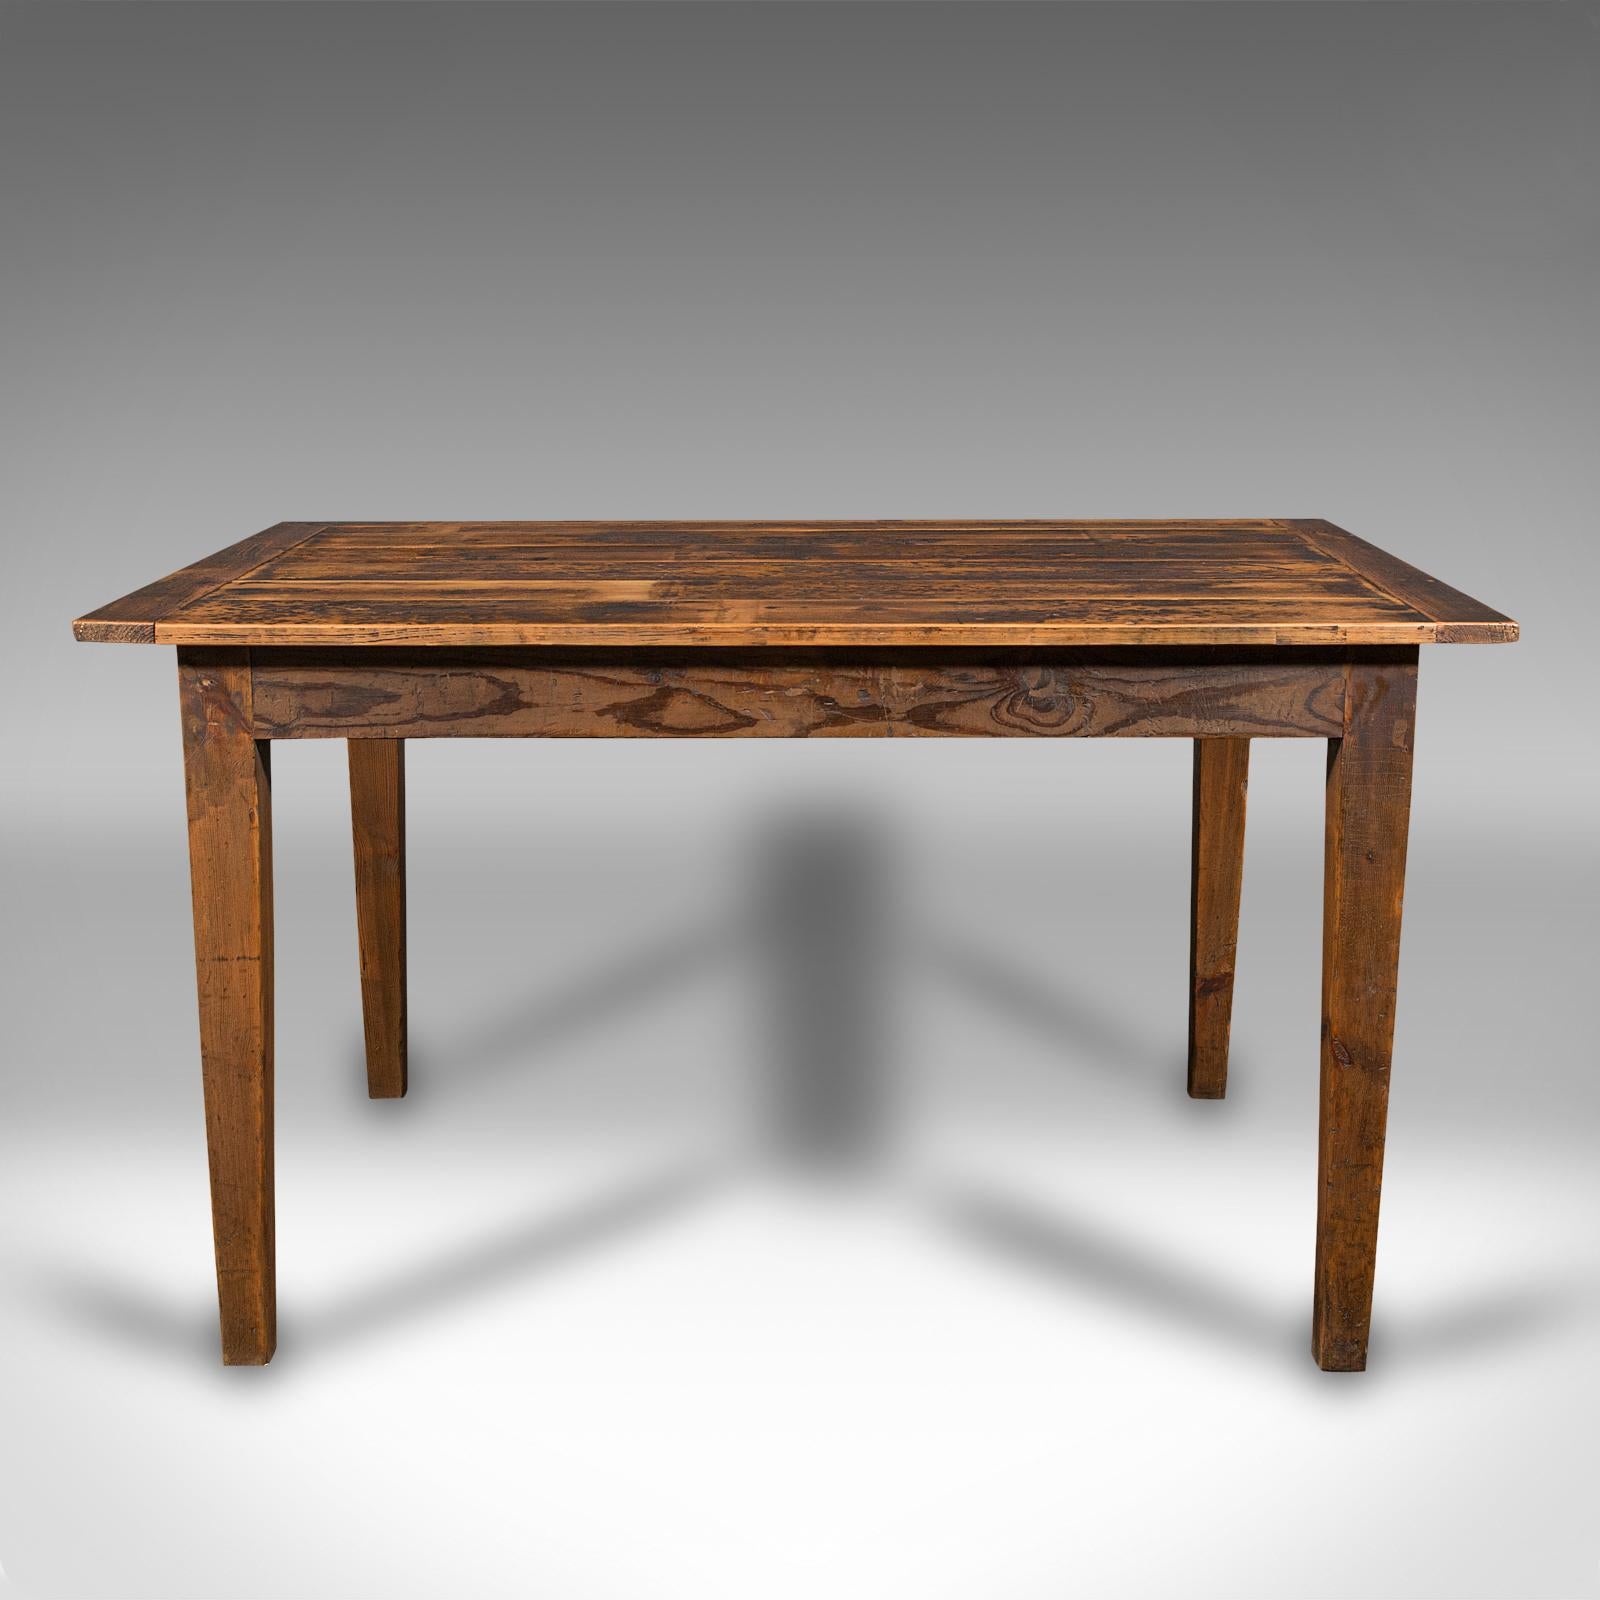 This is an antique farmhouse kitchen table. An English, pine country dining table, dating to the late Victorian period, circa 1900 and later.

Compact of proportion, suitable for seating four comfortably
Displays a desirable aged patina